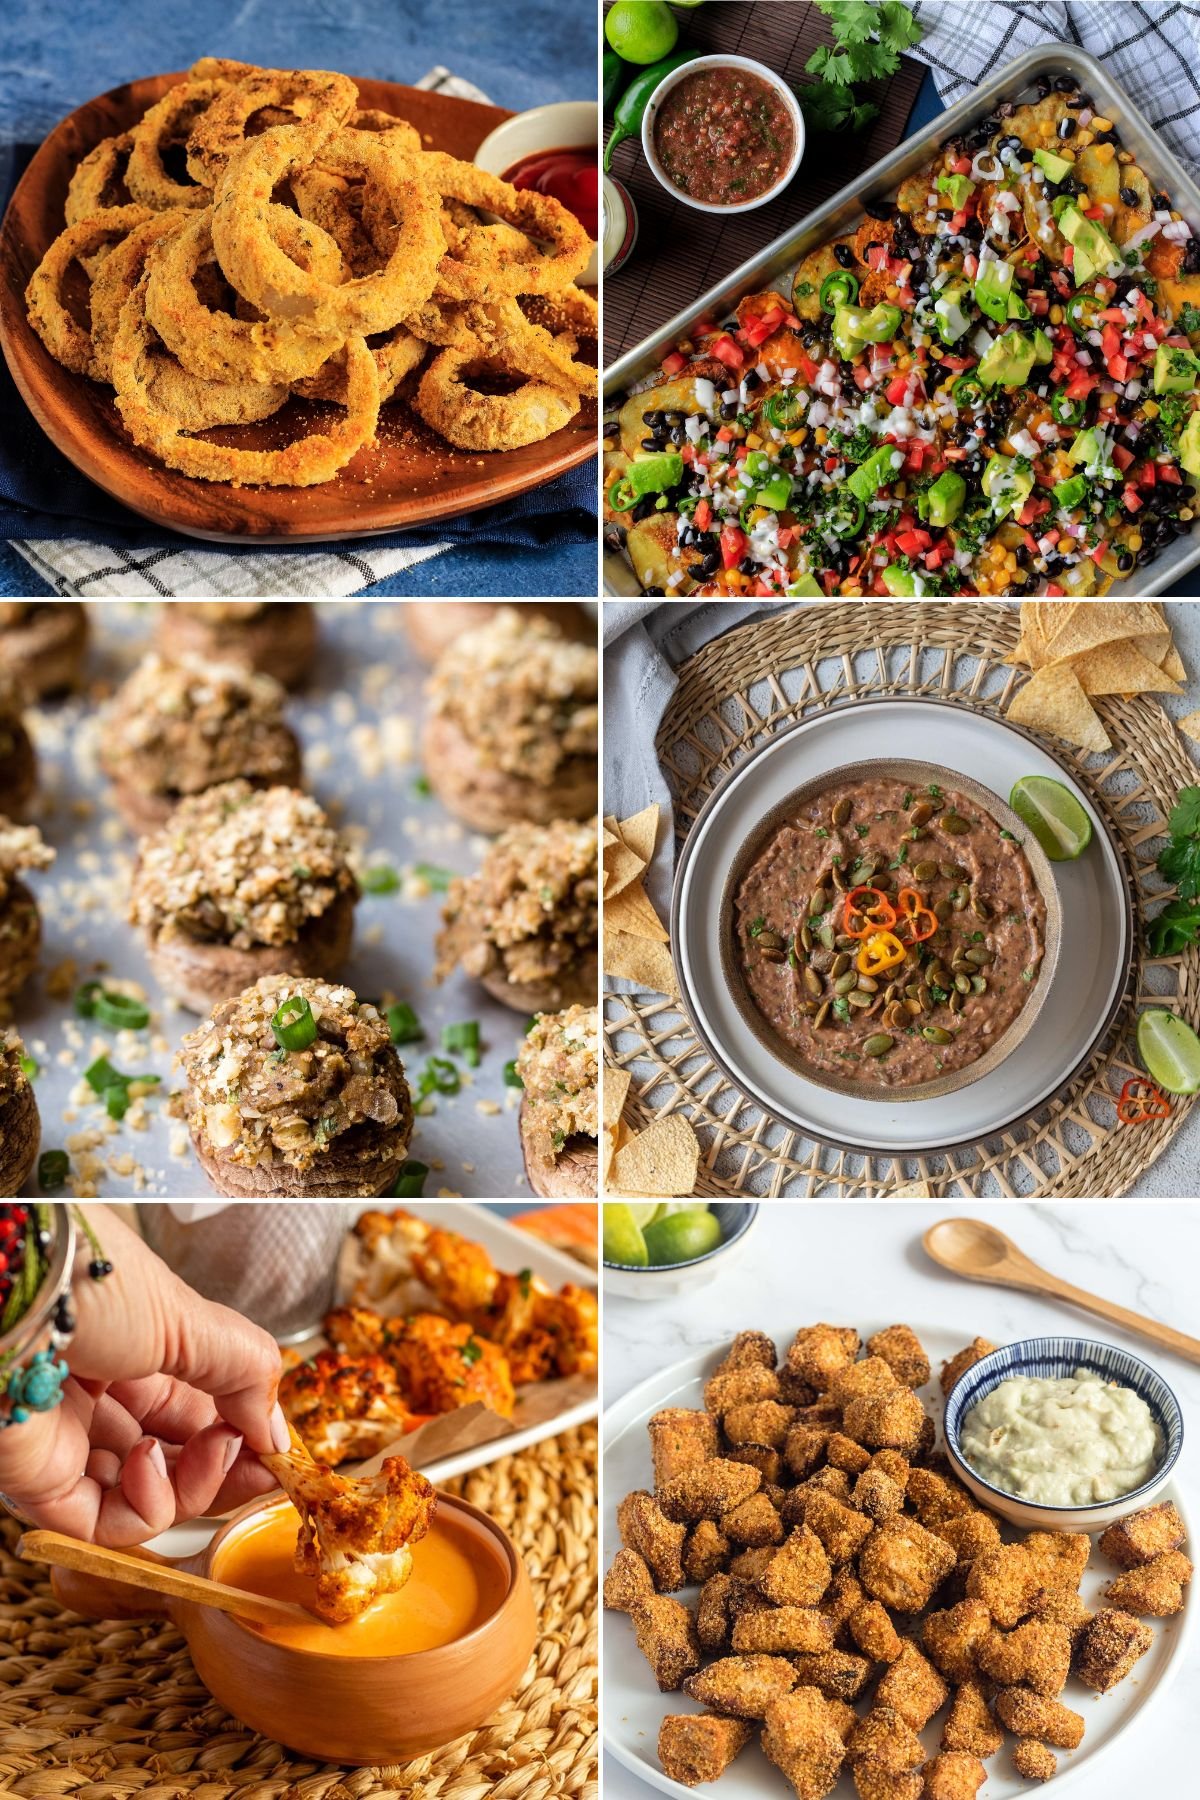 Collage of food photos from recipes in vegetarian game day recipes.